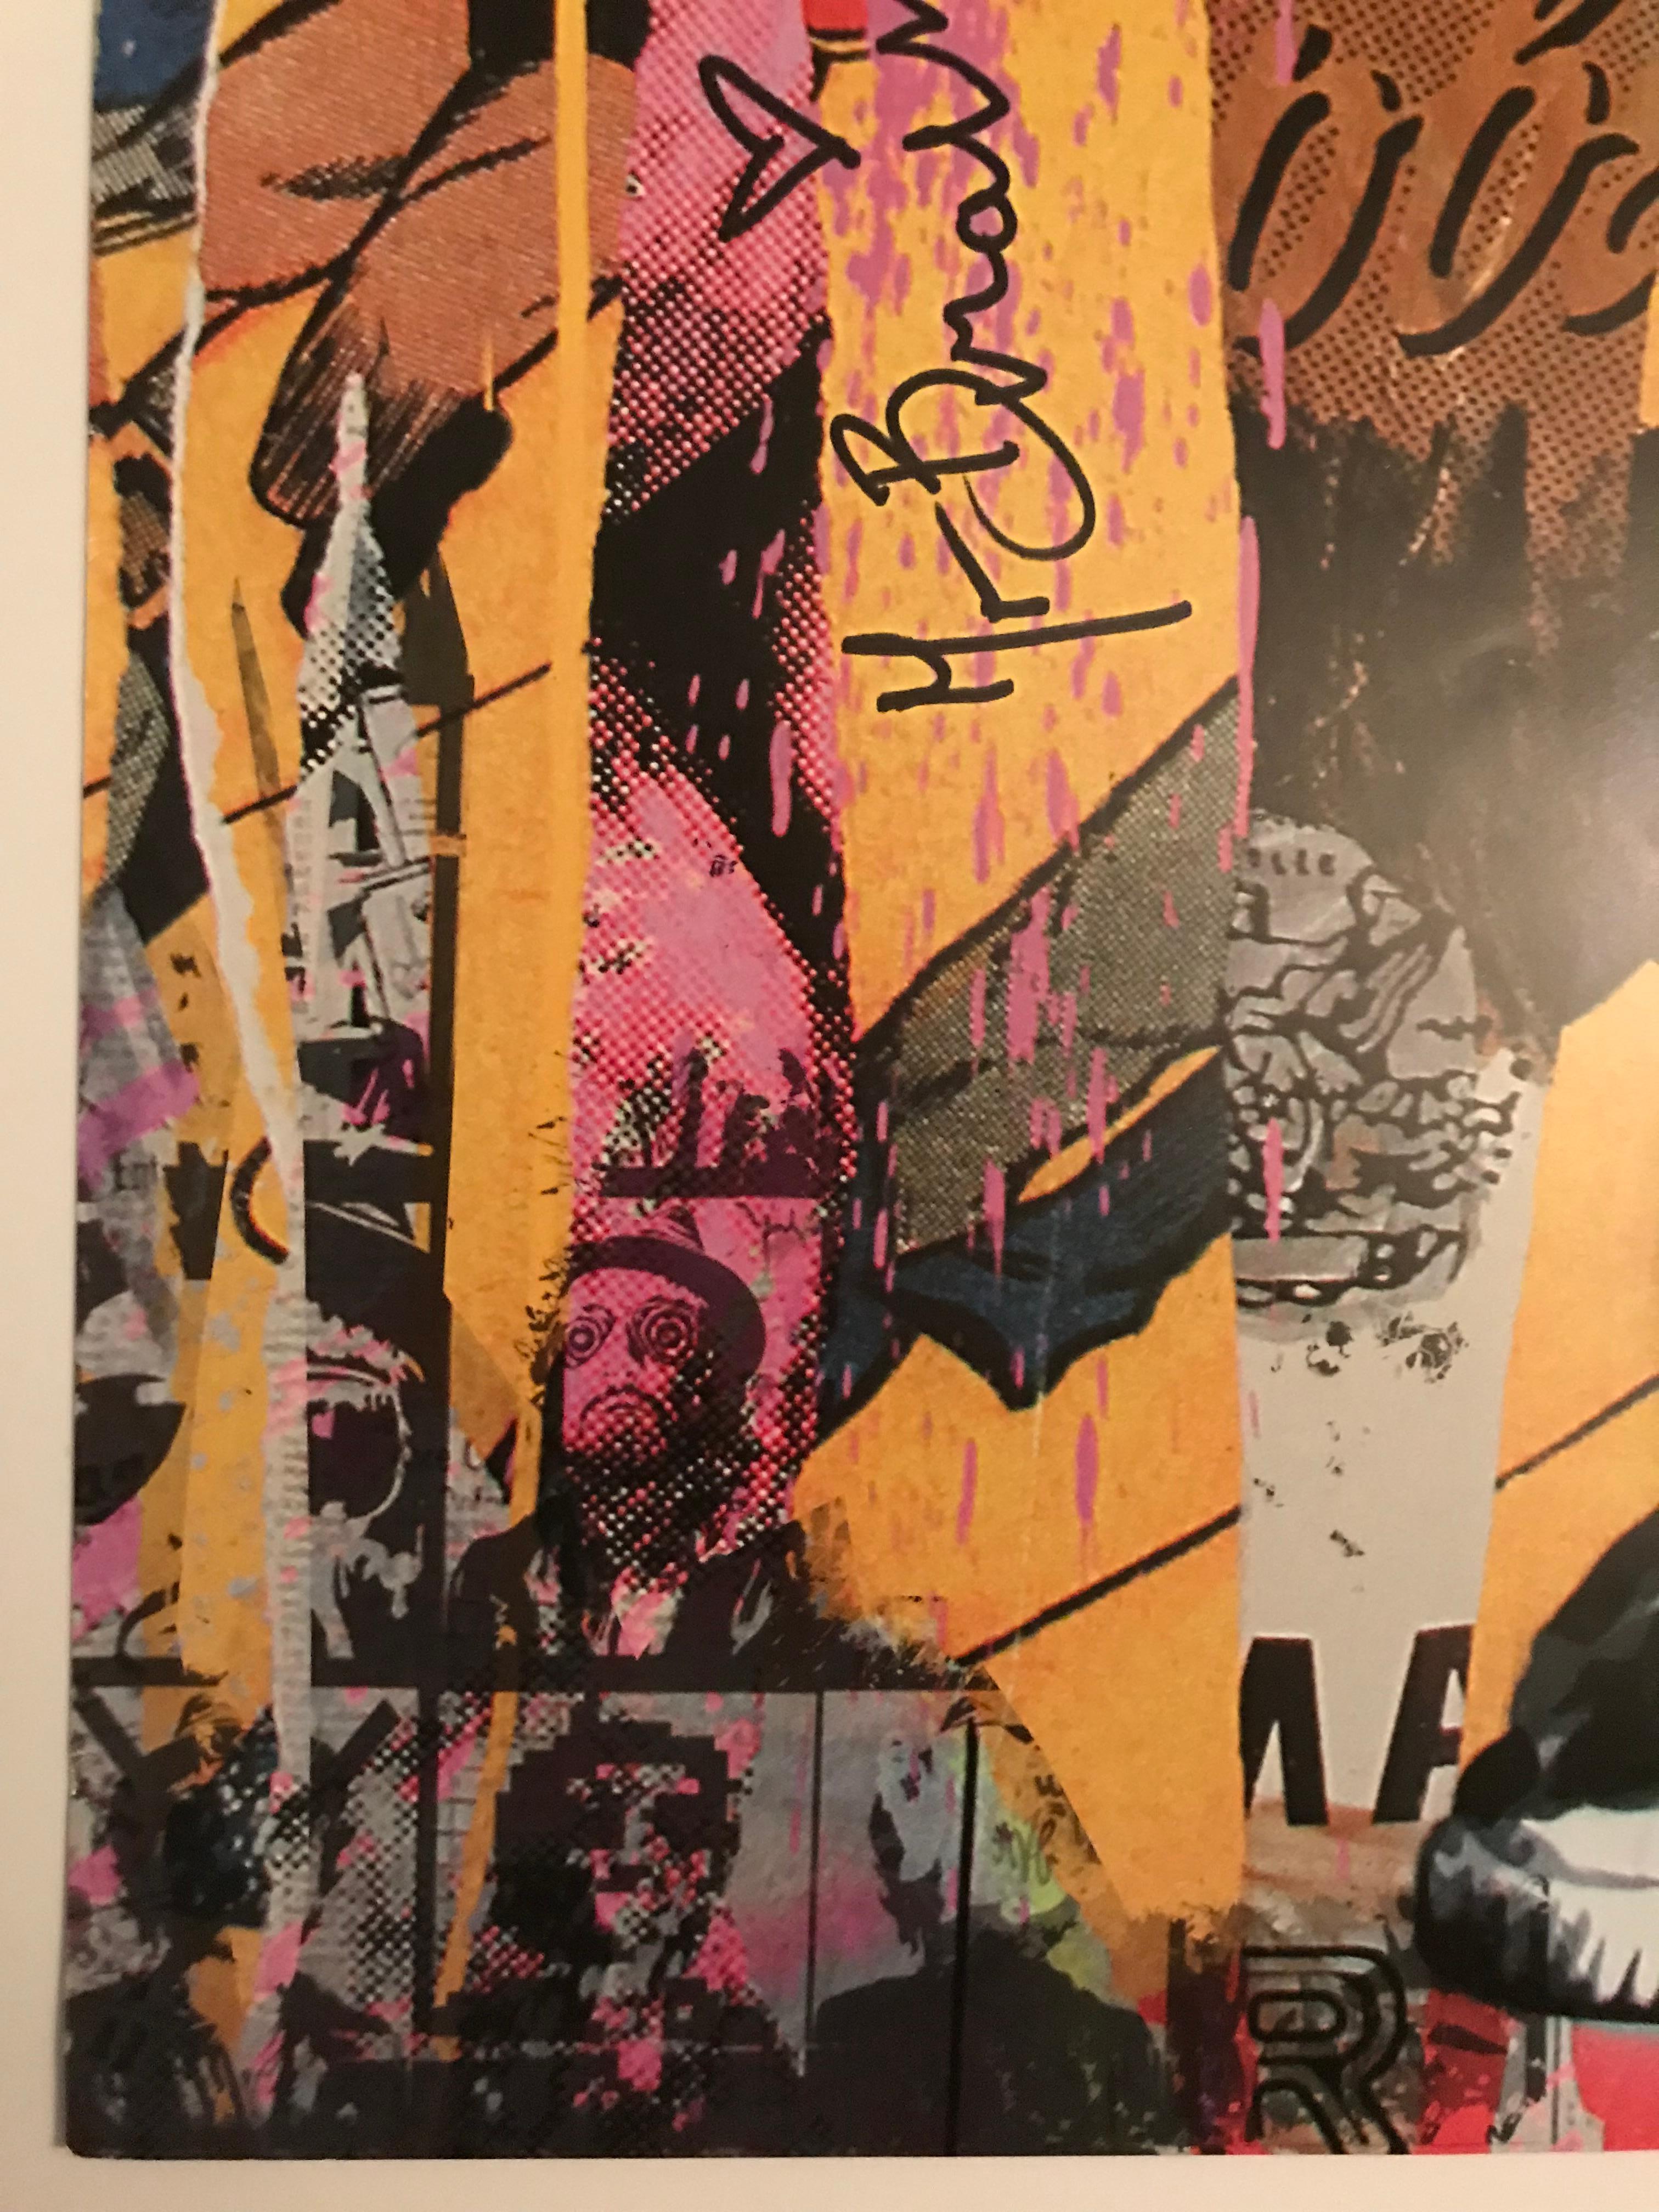 Mr. Brainwash Kate Moss Camera Lithograph Hand Signed NYC ICON'S Street Show en vente 1